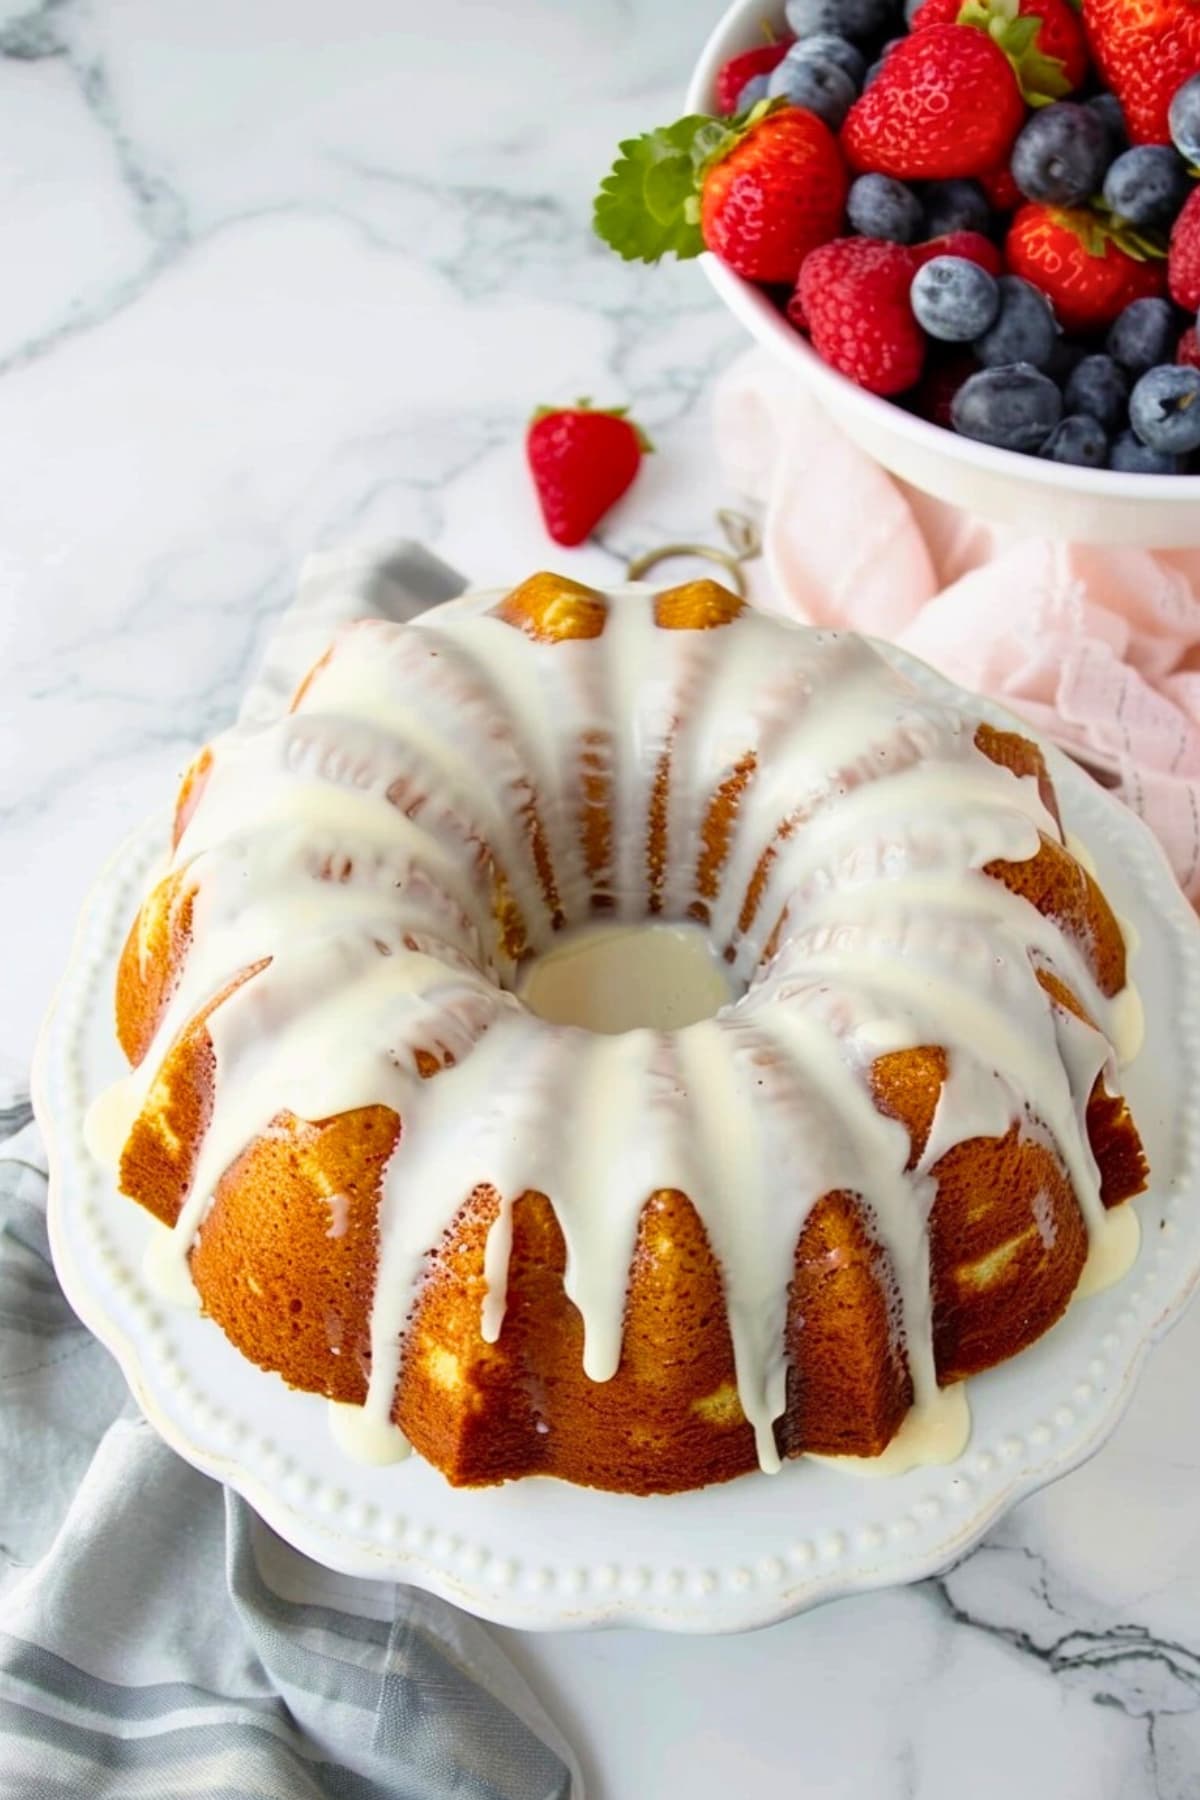 Million dollar pound cake with dripping sugar glaze on a cake tray, a bowl of berries on the side.